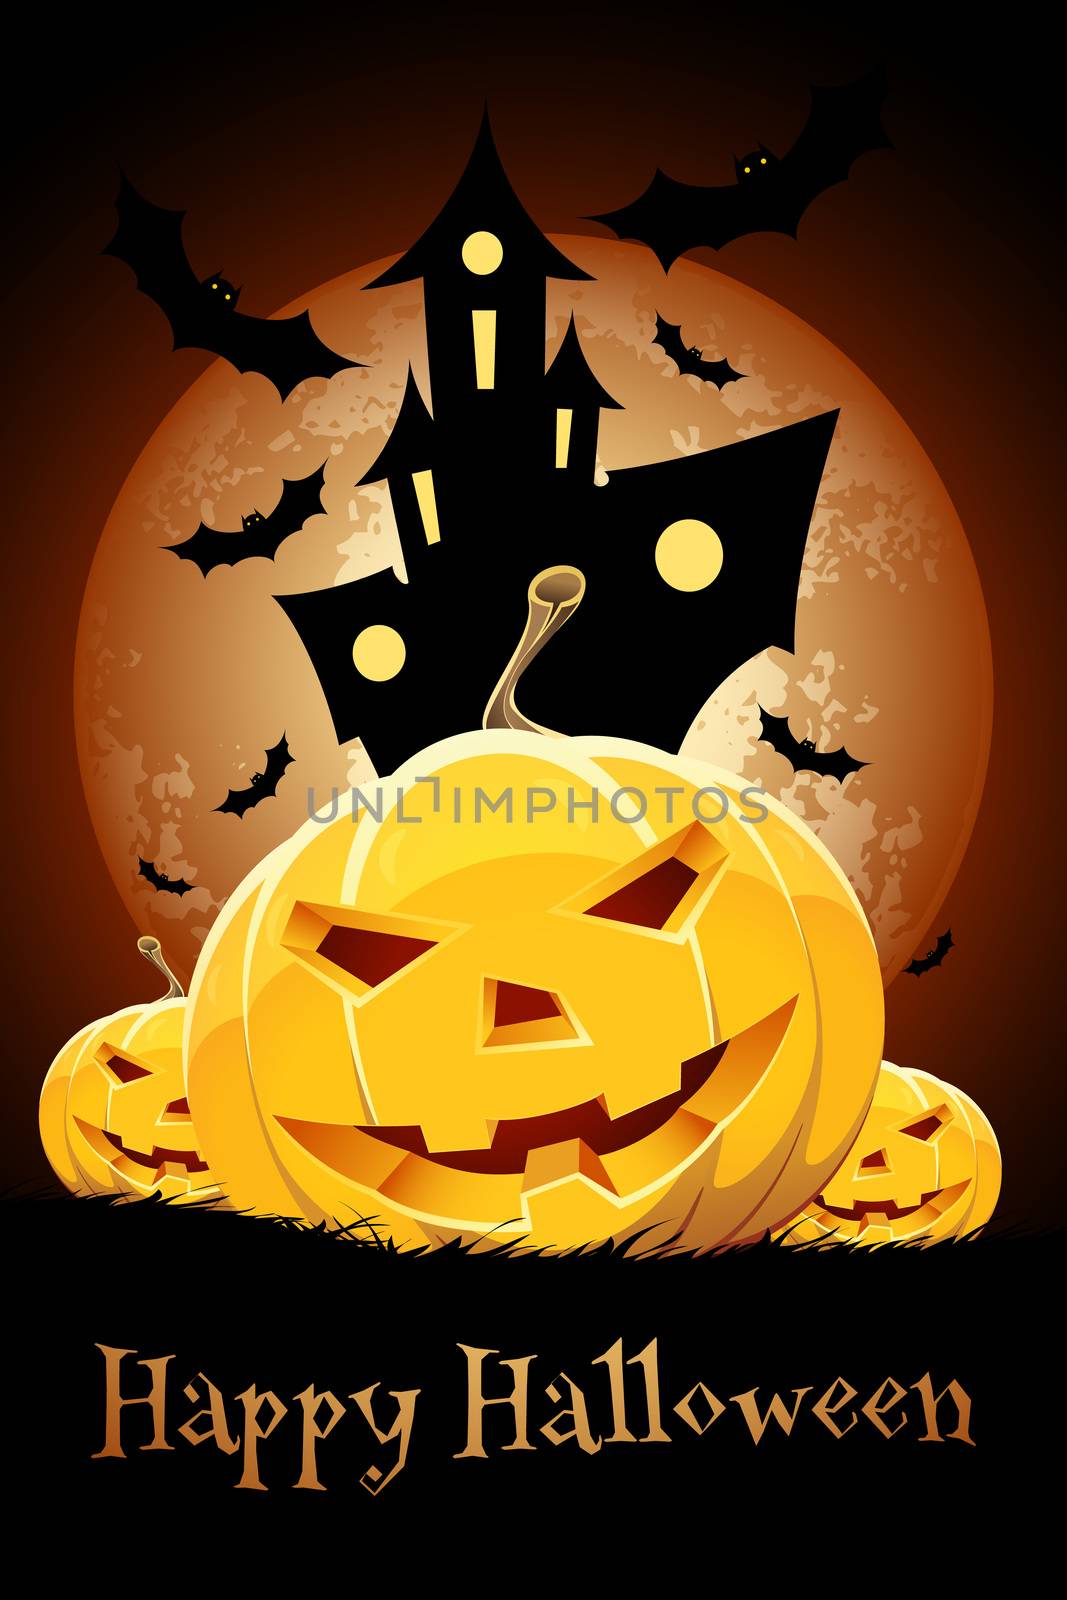 Halloween Party Card with Pumpkins, Bats and Haunted House